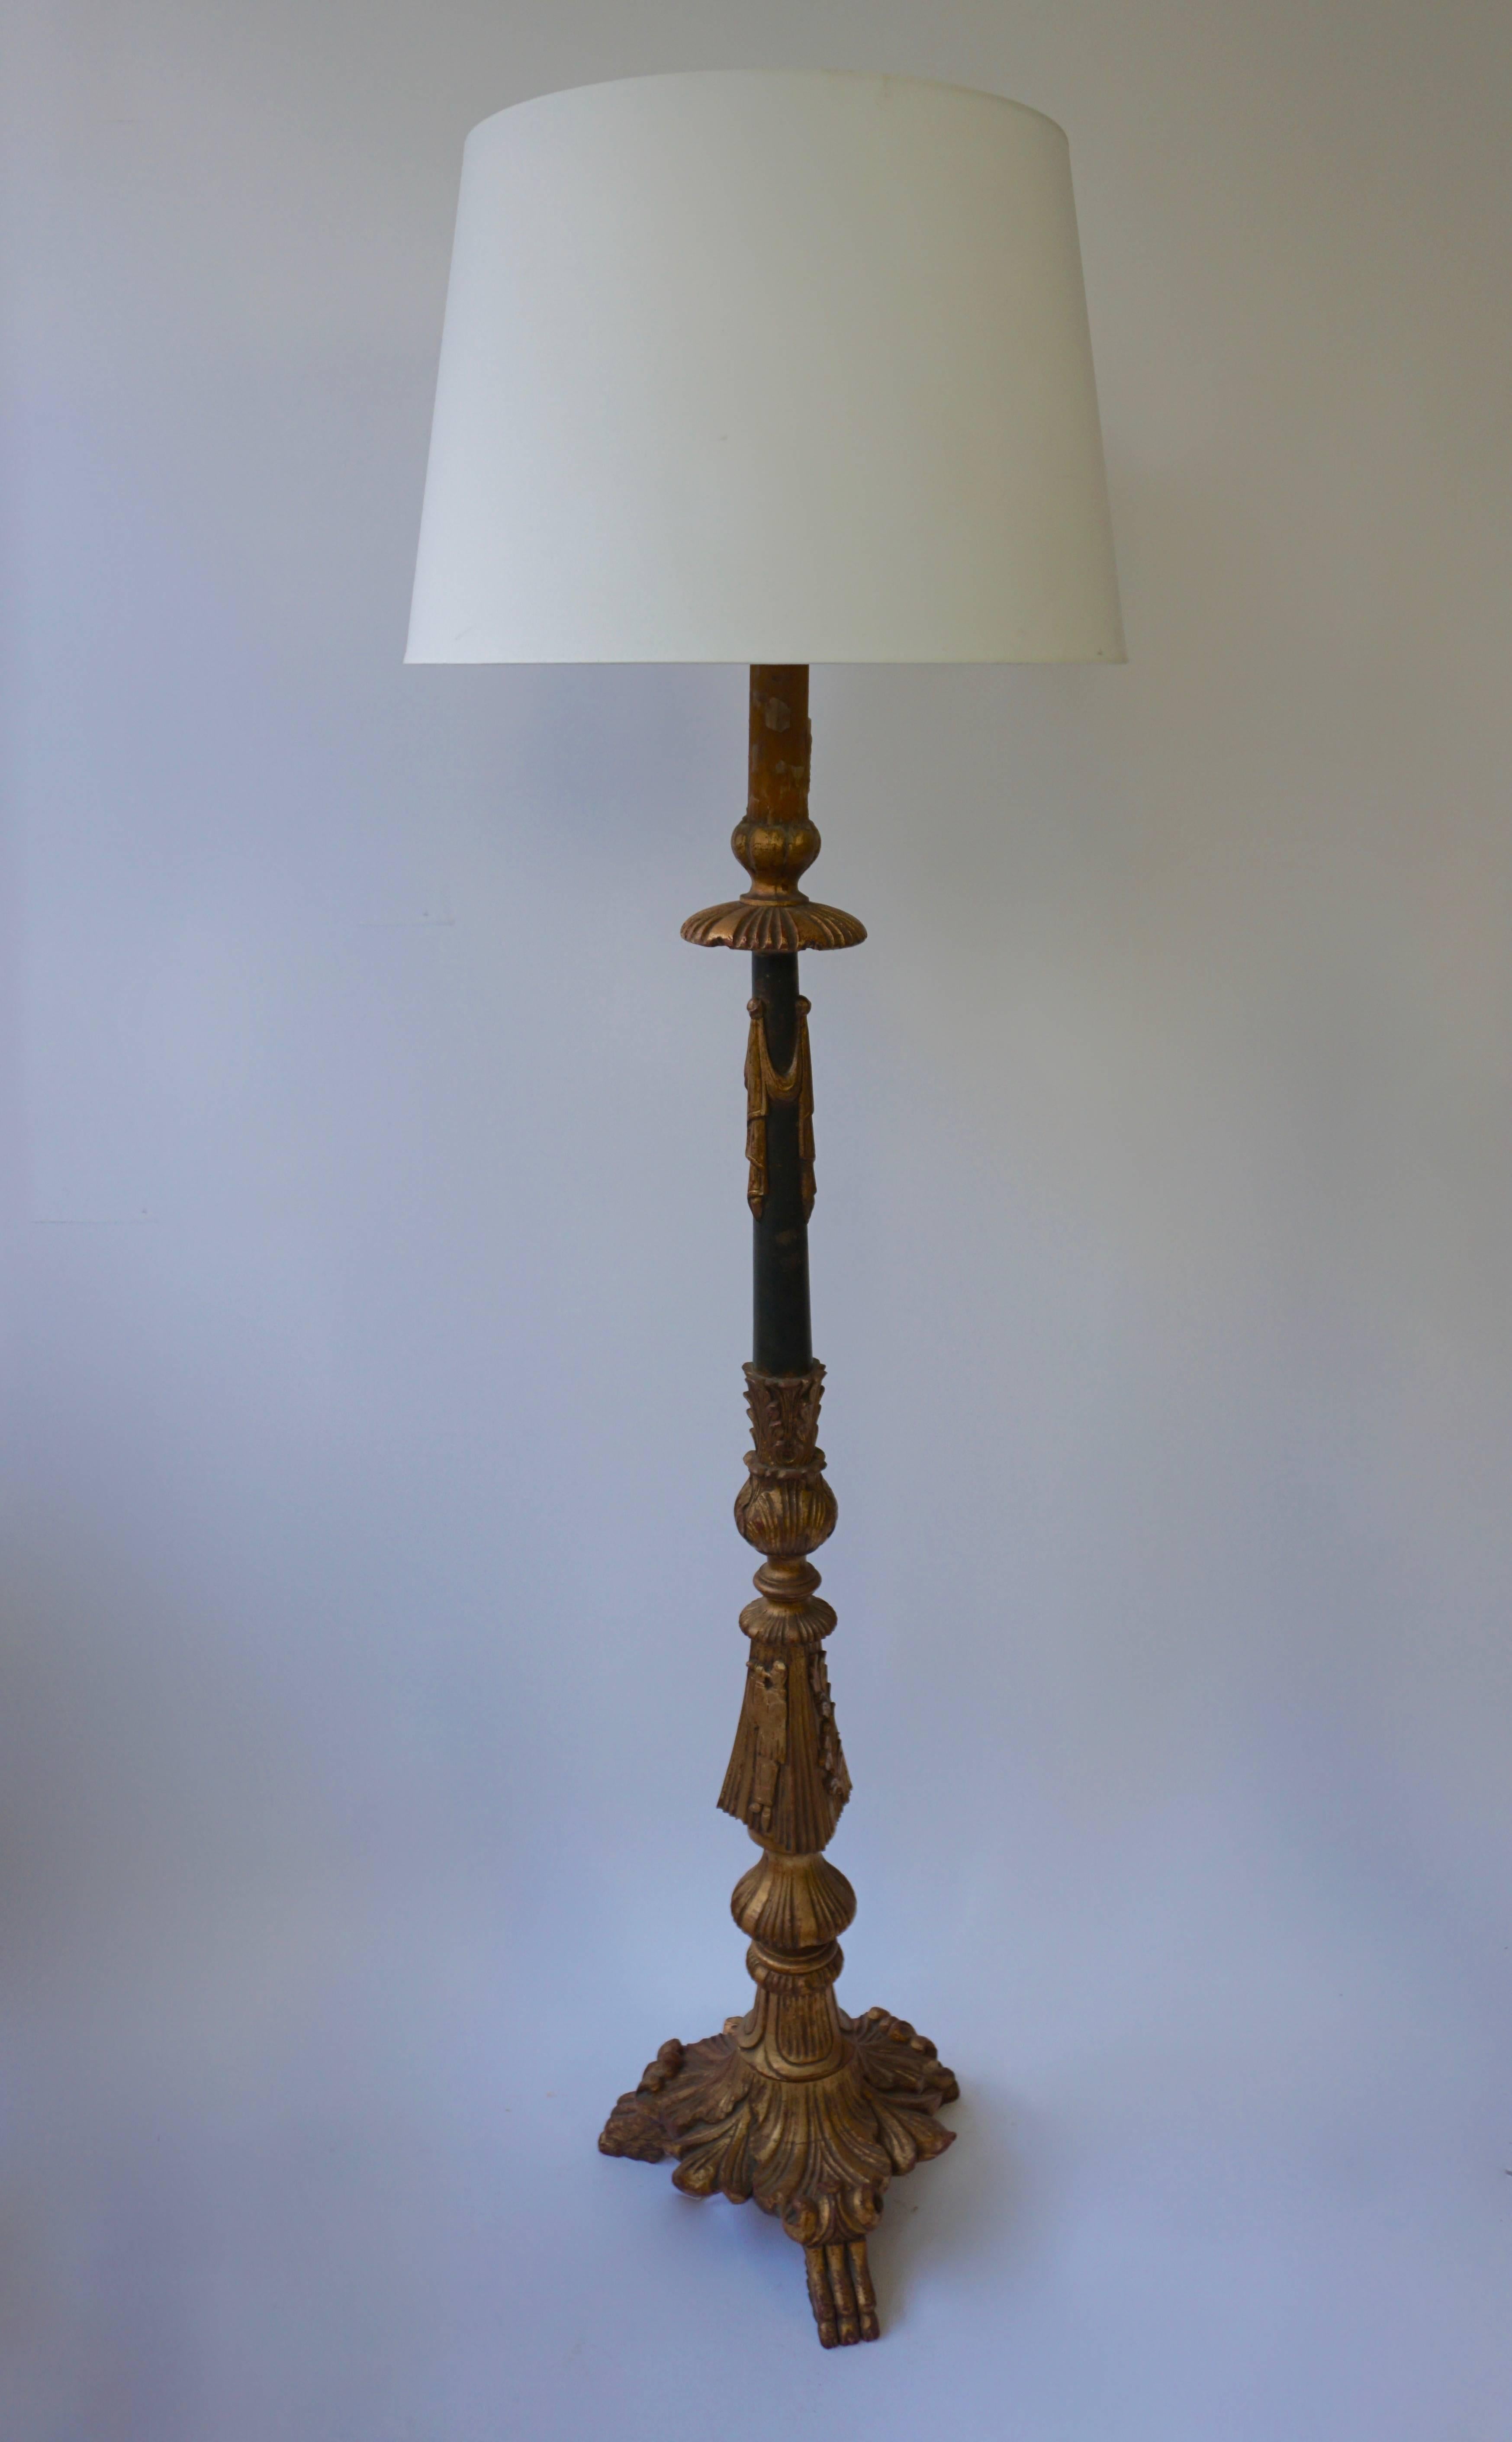 A candelabrum shaped carved, gilt and painted wood lamp stand in the neoclassical style, mid-20th century.

Height without shade: 168 cm.
Diameter: 38 cm.
Height with shade: 177 cm.
Diameter shade: 54 cm.